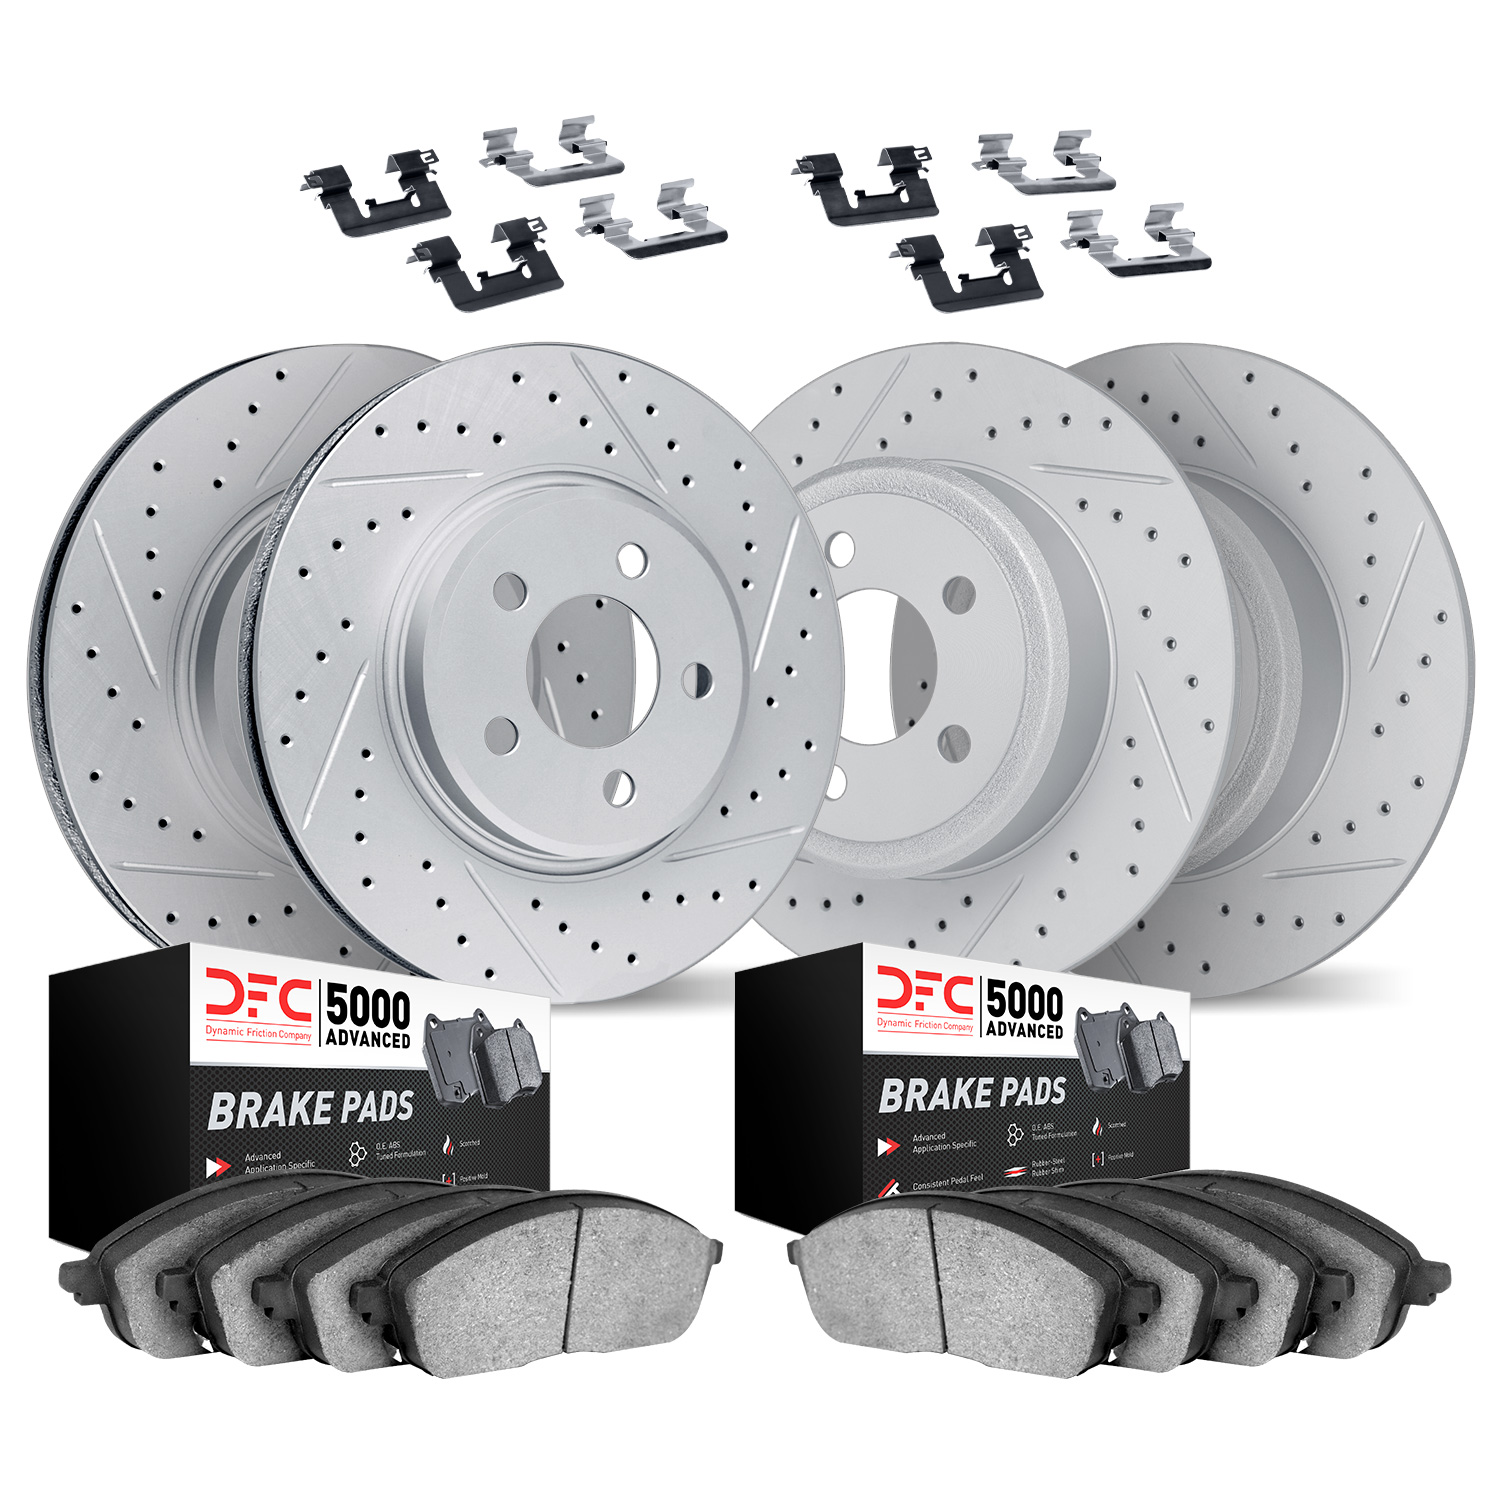 2514-59036 Geoperformance Drilled/Slotted Rotors w/5000 Advanced Brake Pads Kit & Hardware, 1995-1998 Acura/Honda, Position: Fro